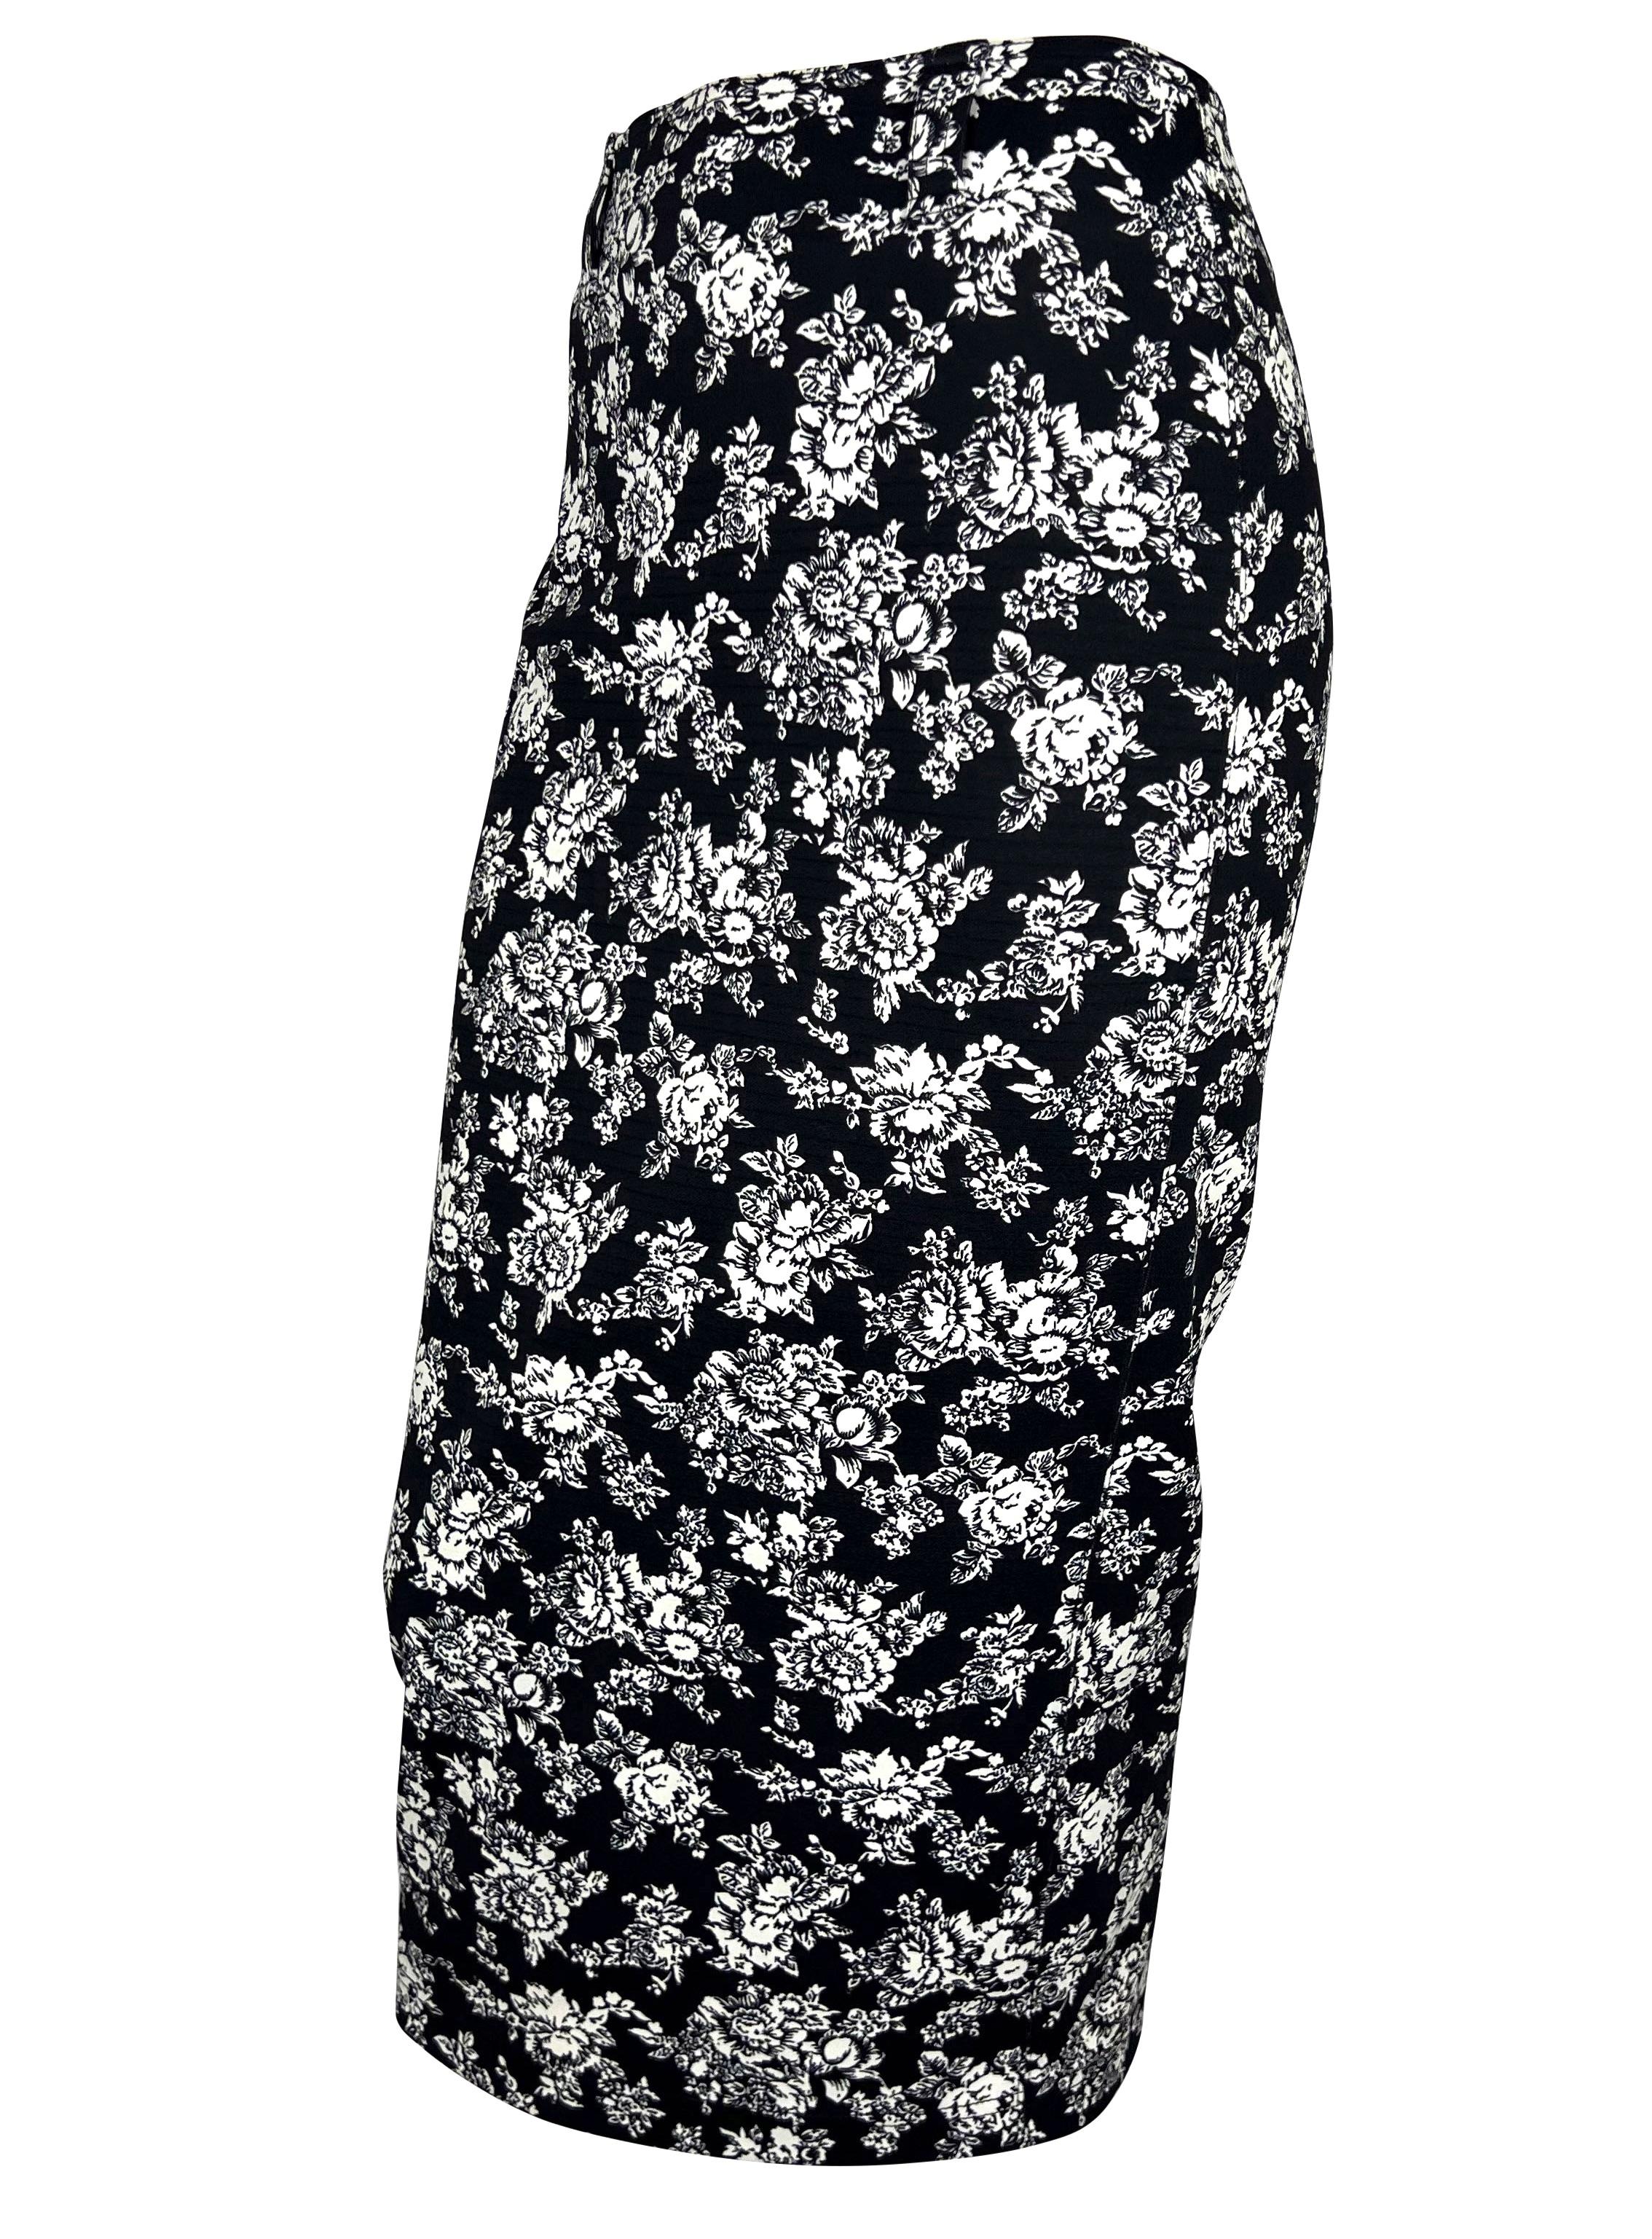 Presenting a black and white floral bodycon skirt designed by Gianni Versace for his Spring/Summer 1993 collection. The floral print is a spandex and rubber blend that perfectly hugs and enhances the wearer. Check out our storefront for more vintage